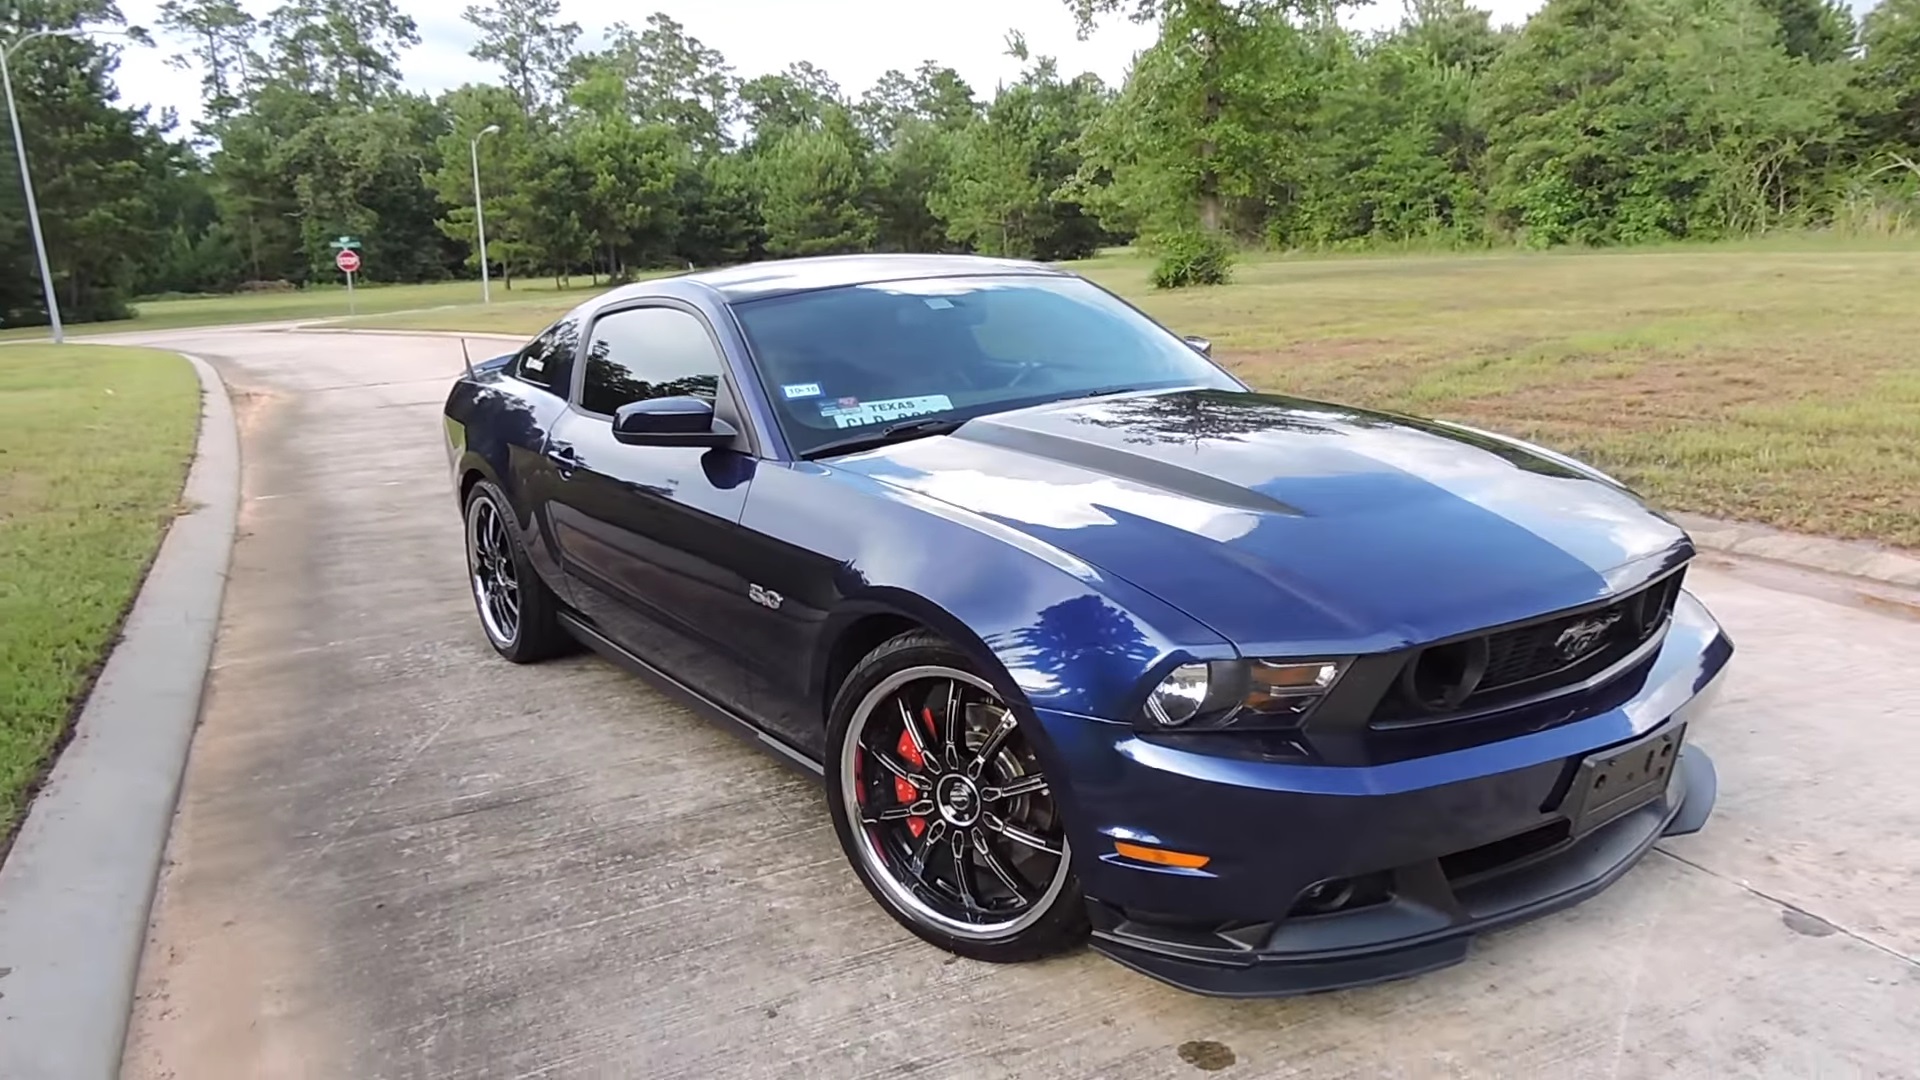 Video: 2012 Mustang GT Premium Review - Is It Good Or Bad?